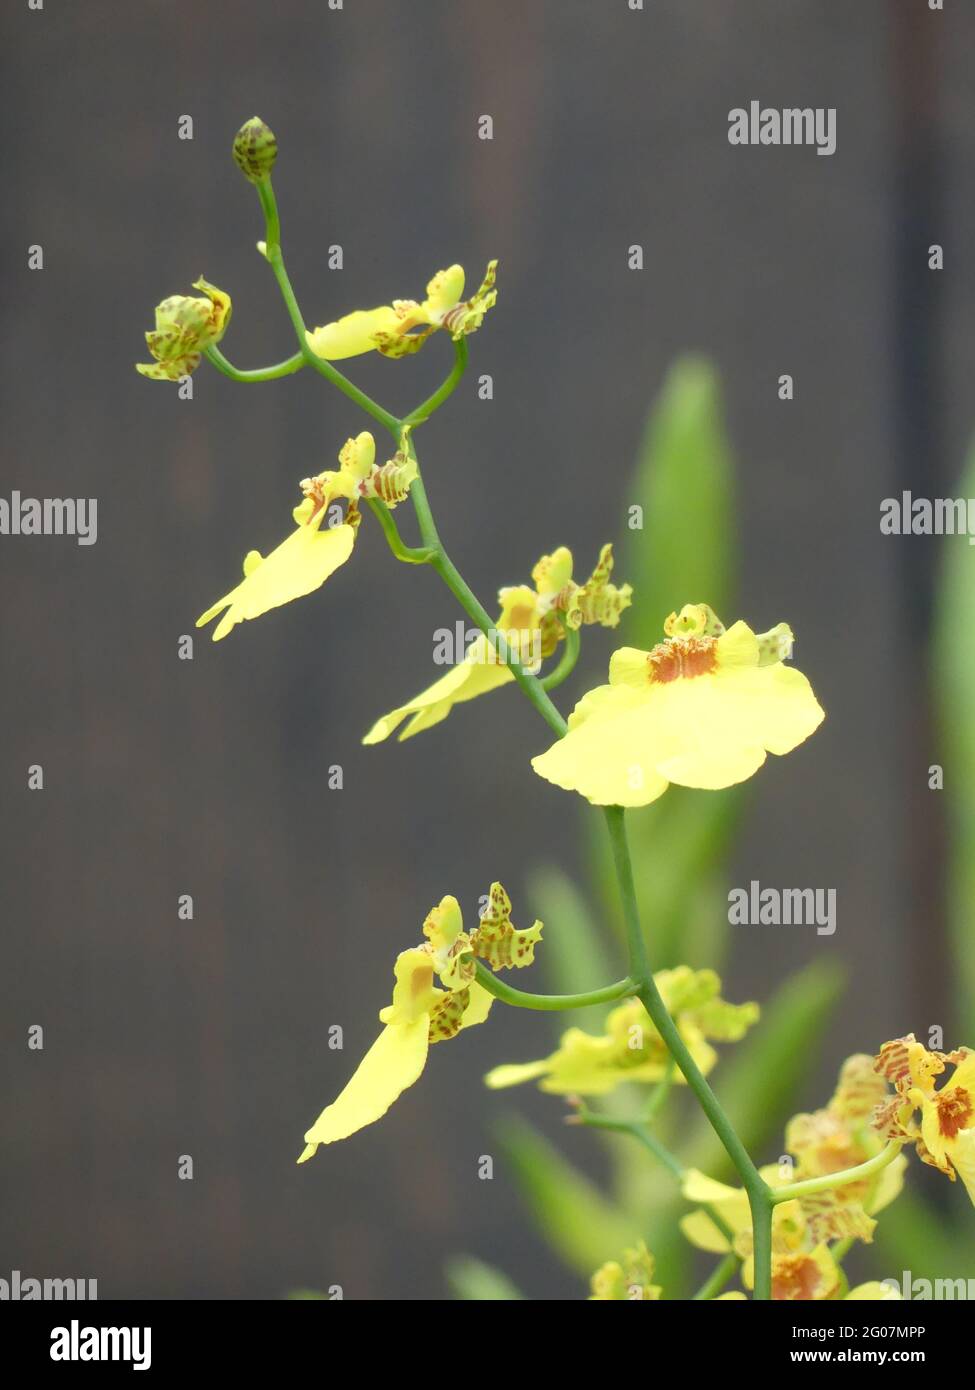 Blooming Wydler's dancing-lady orchid in the dark blurred background Stock Photo